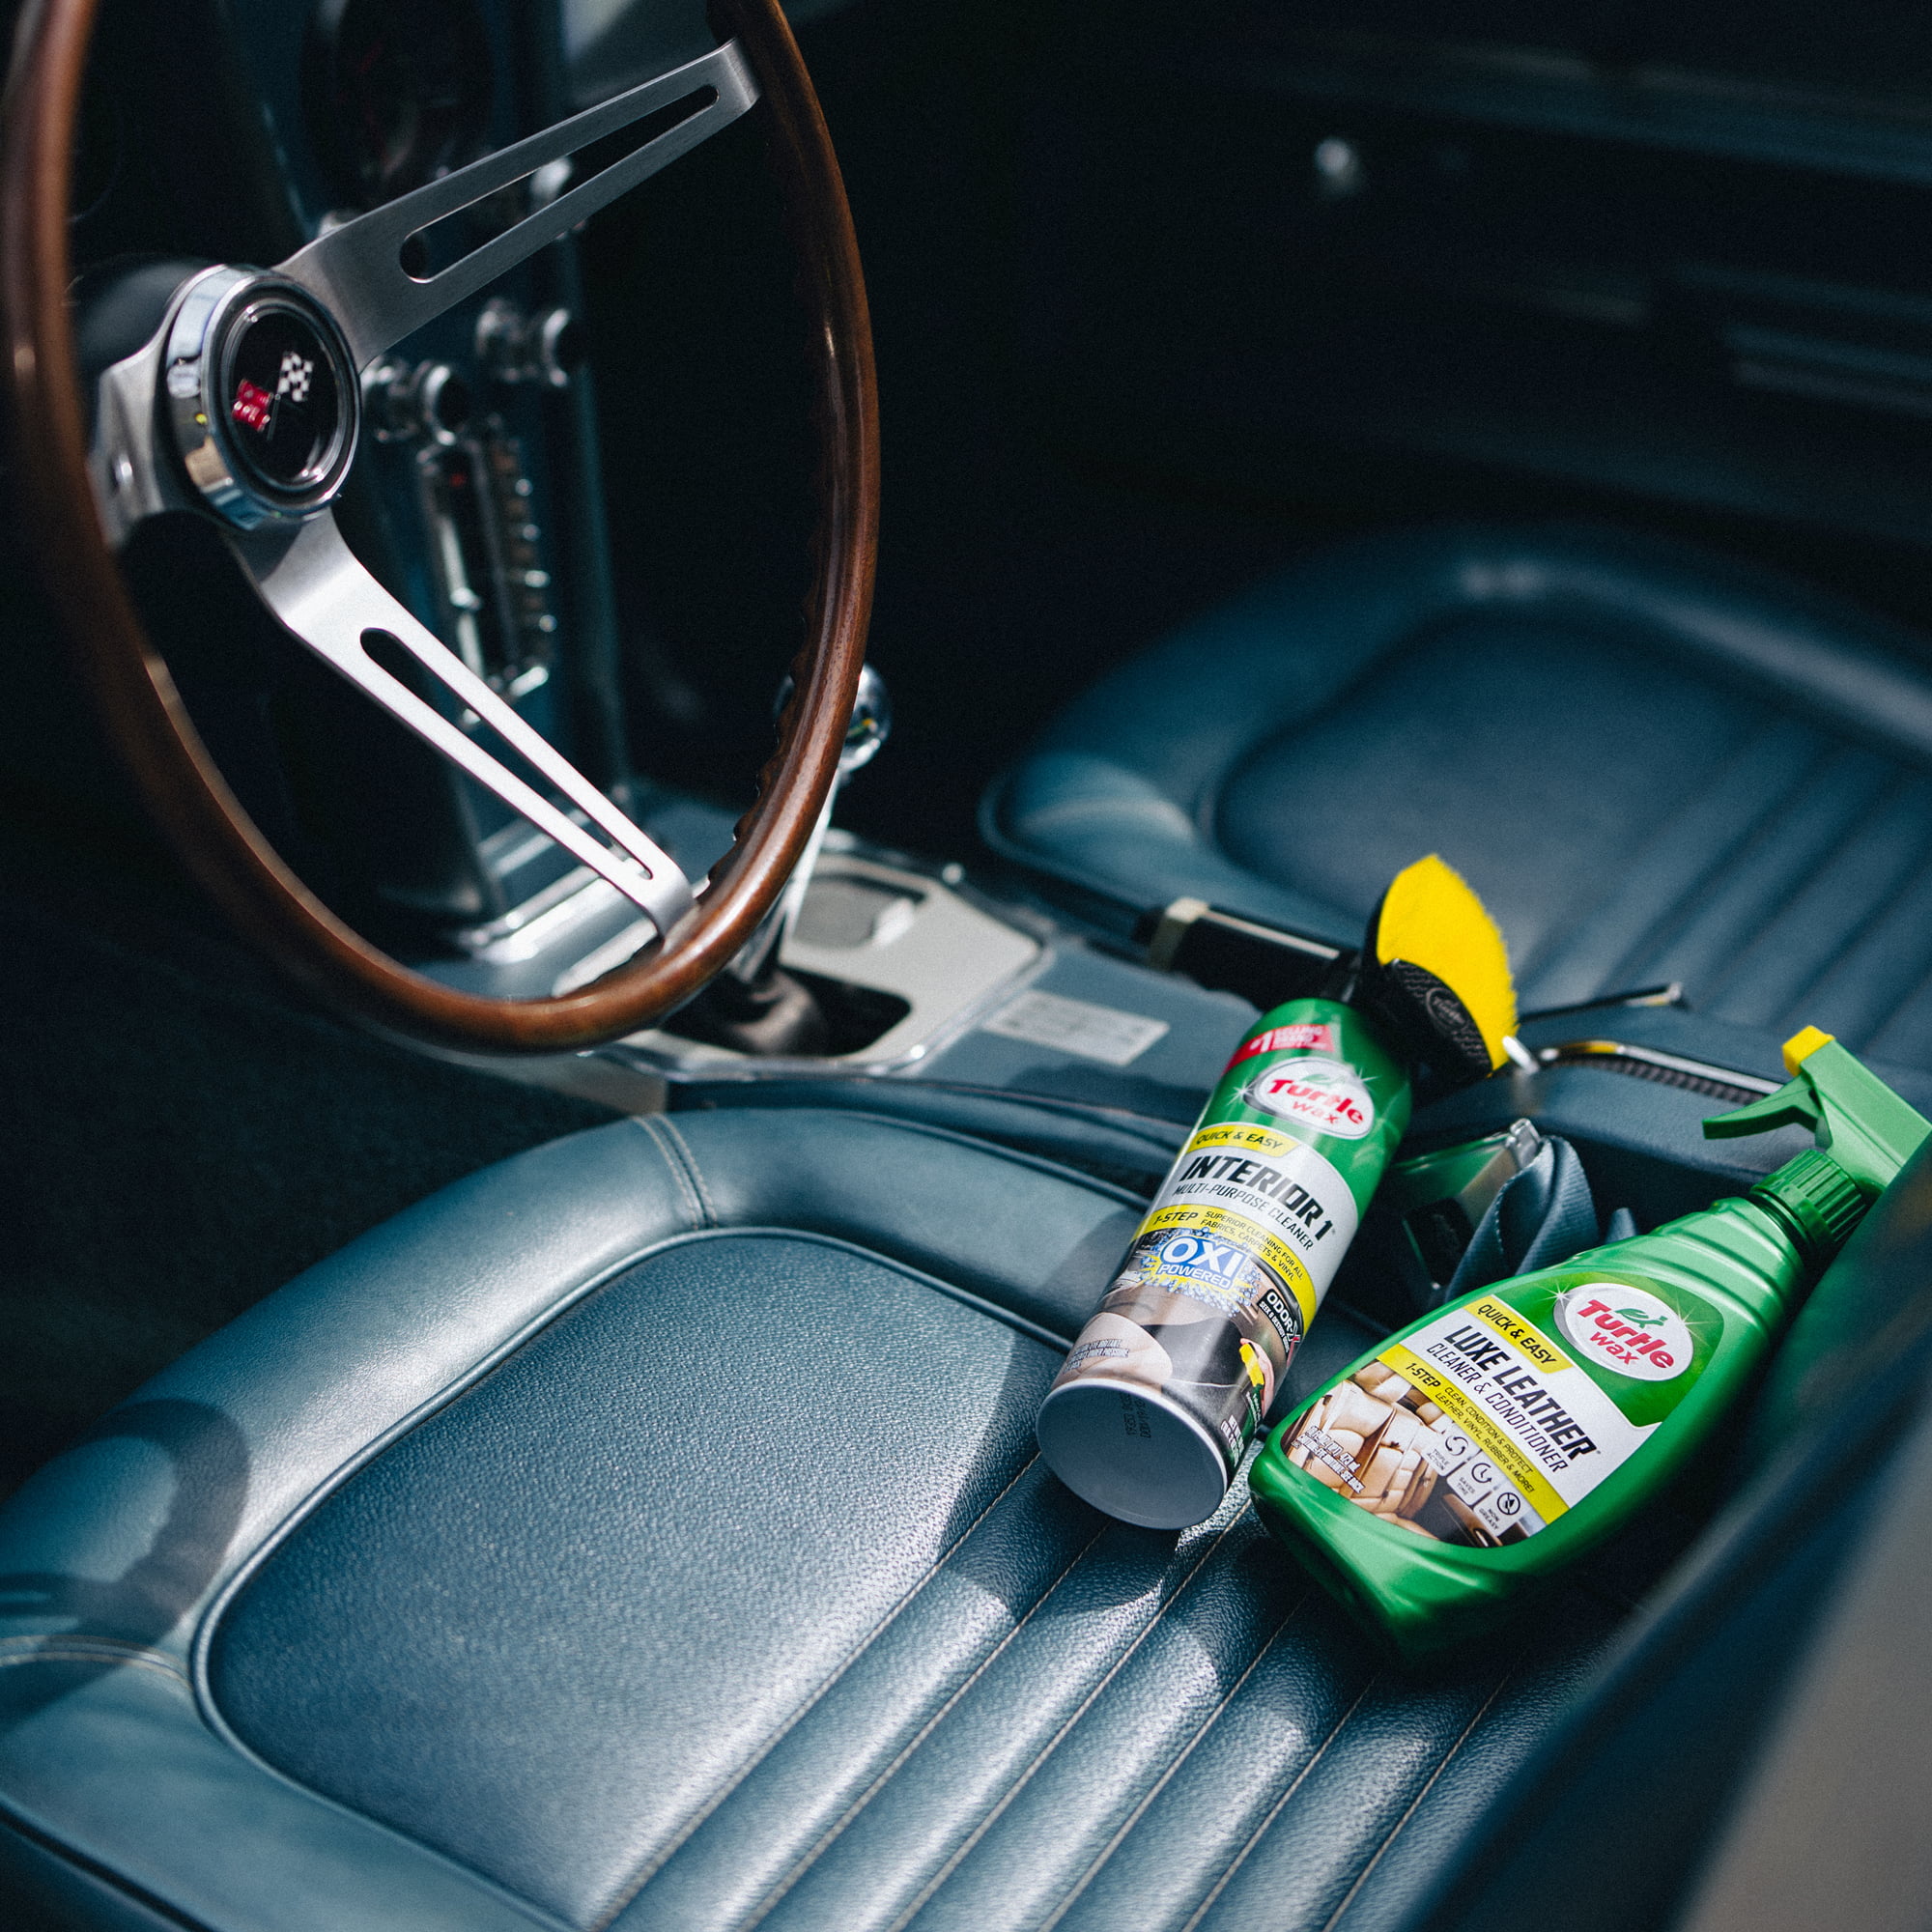  Turtle Wax 50941 Spray & Wipe Leather Cleaner & Conditioner :  Automotive